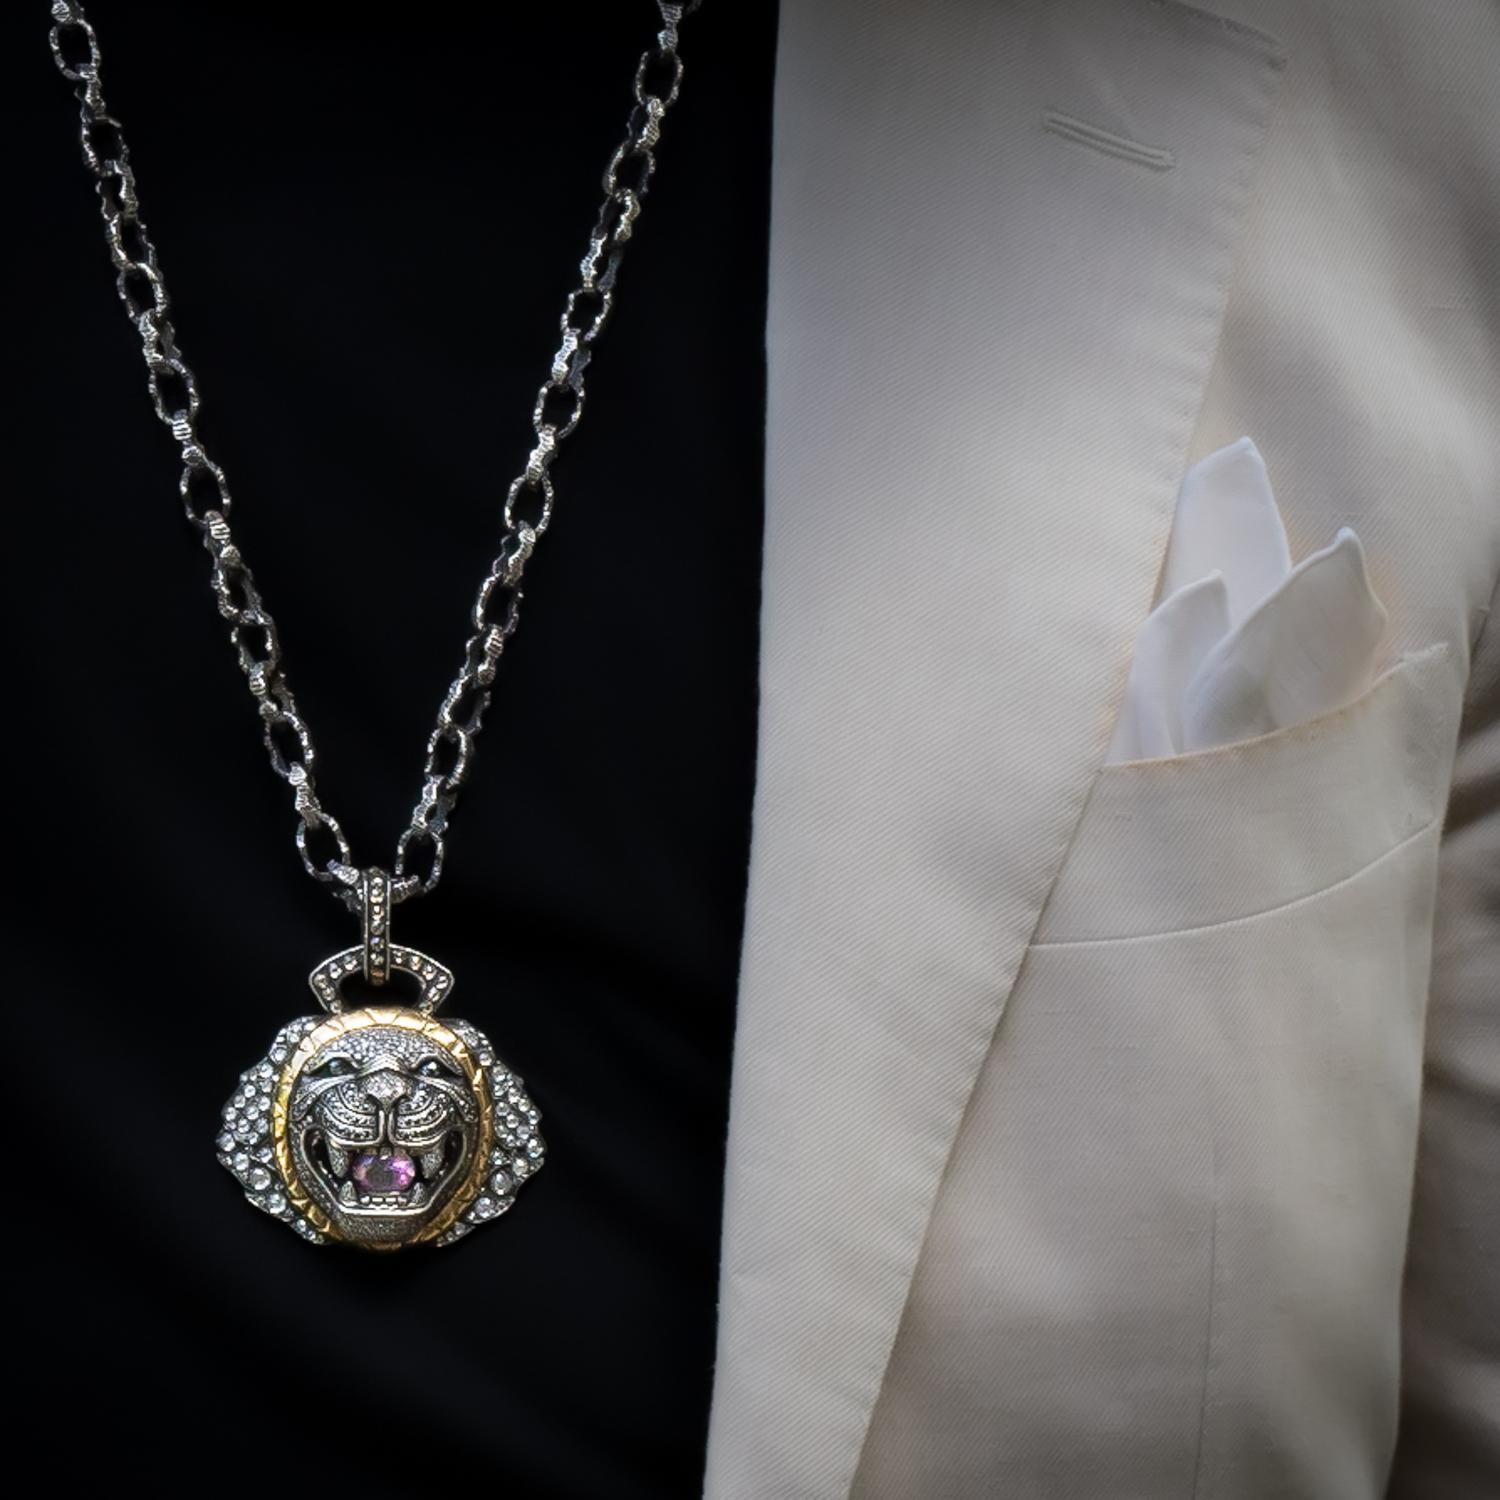 This stunning signature series lion necklace is crafted from 18 karat gold and sterling silver and features a magnificent mane set with antique rosecut white diamonds. The face of the lion is fully encrusted with sparkling champagne, brown, and